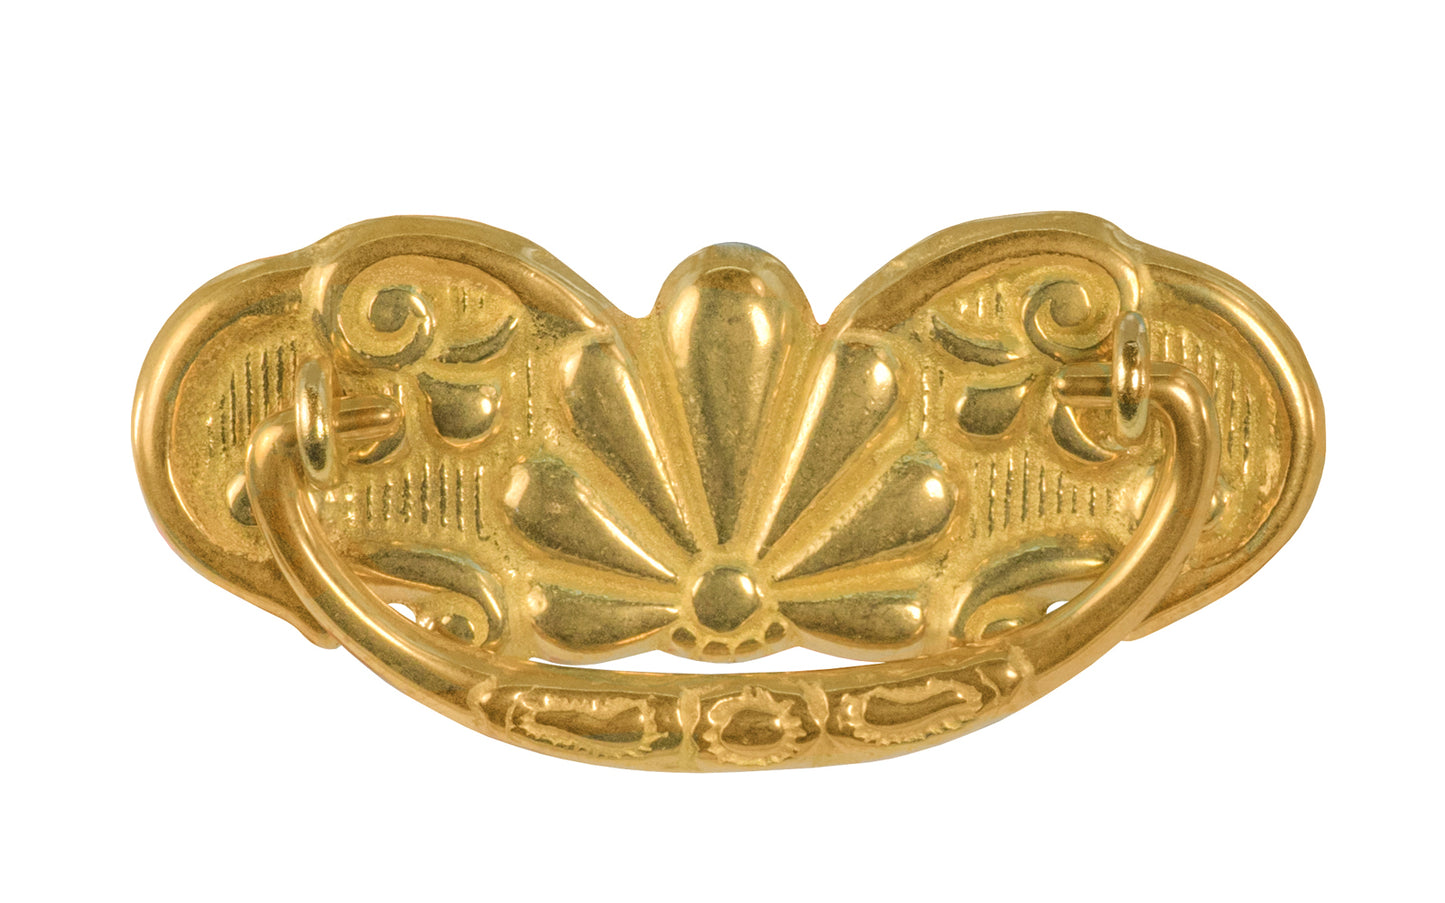 A traditional & ornate 3" on centers drop pull that's great for dressers, drawers, cabinets, tables, desks. Made of quality solid cast brass material, this drop pull is very durable with a nice look. Unlacquered brass material. 